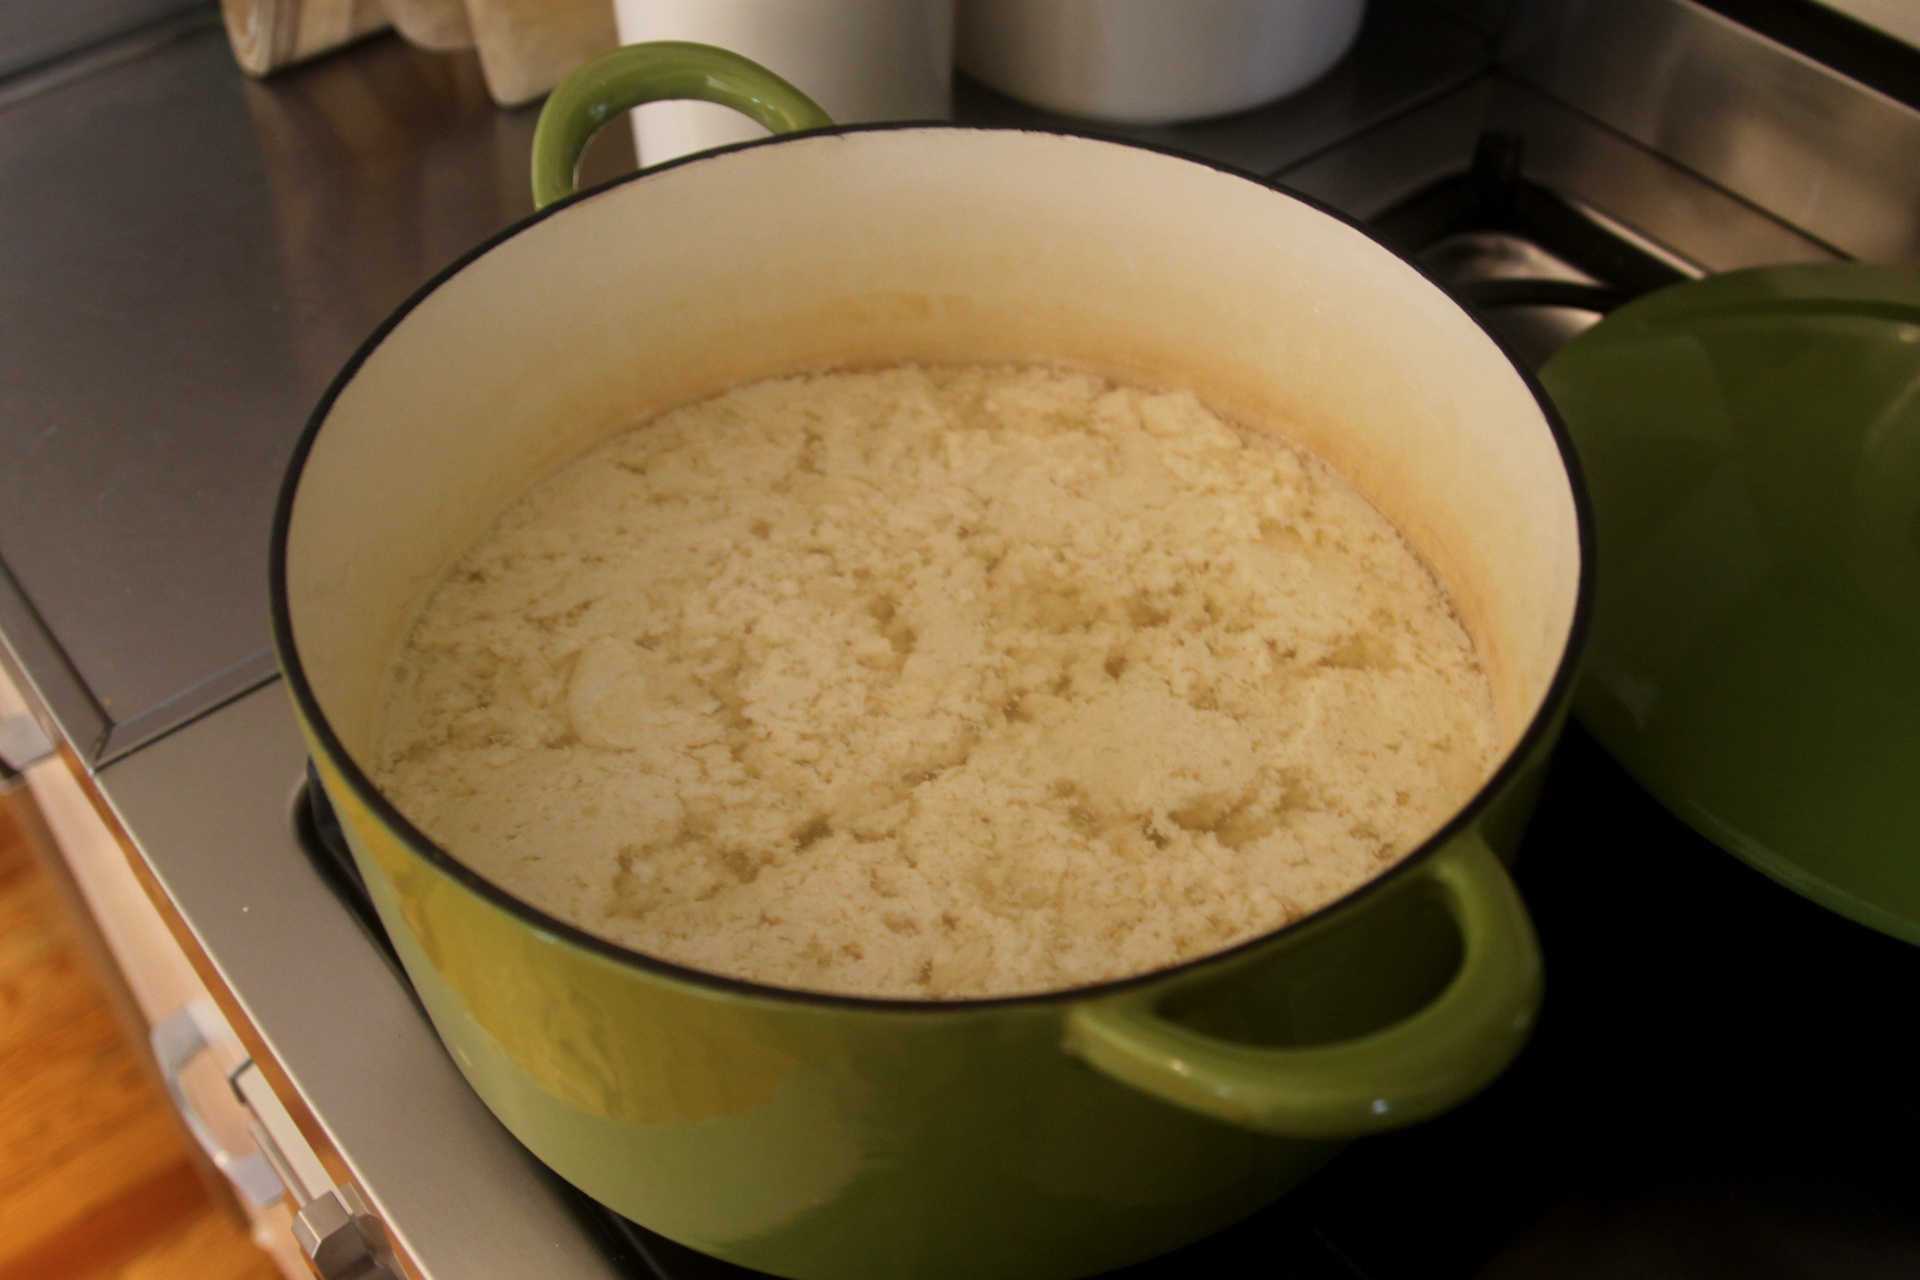 When the soy milk has fully curdled, you should see full separation between curds and whey.